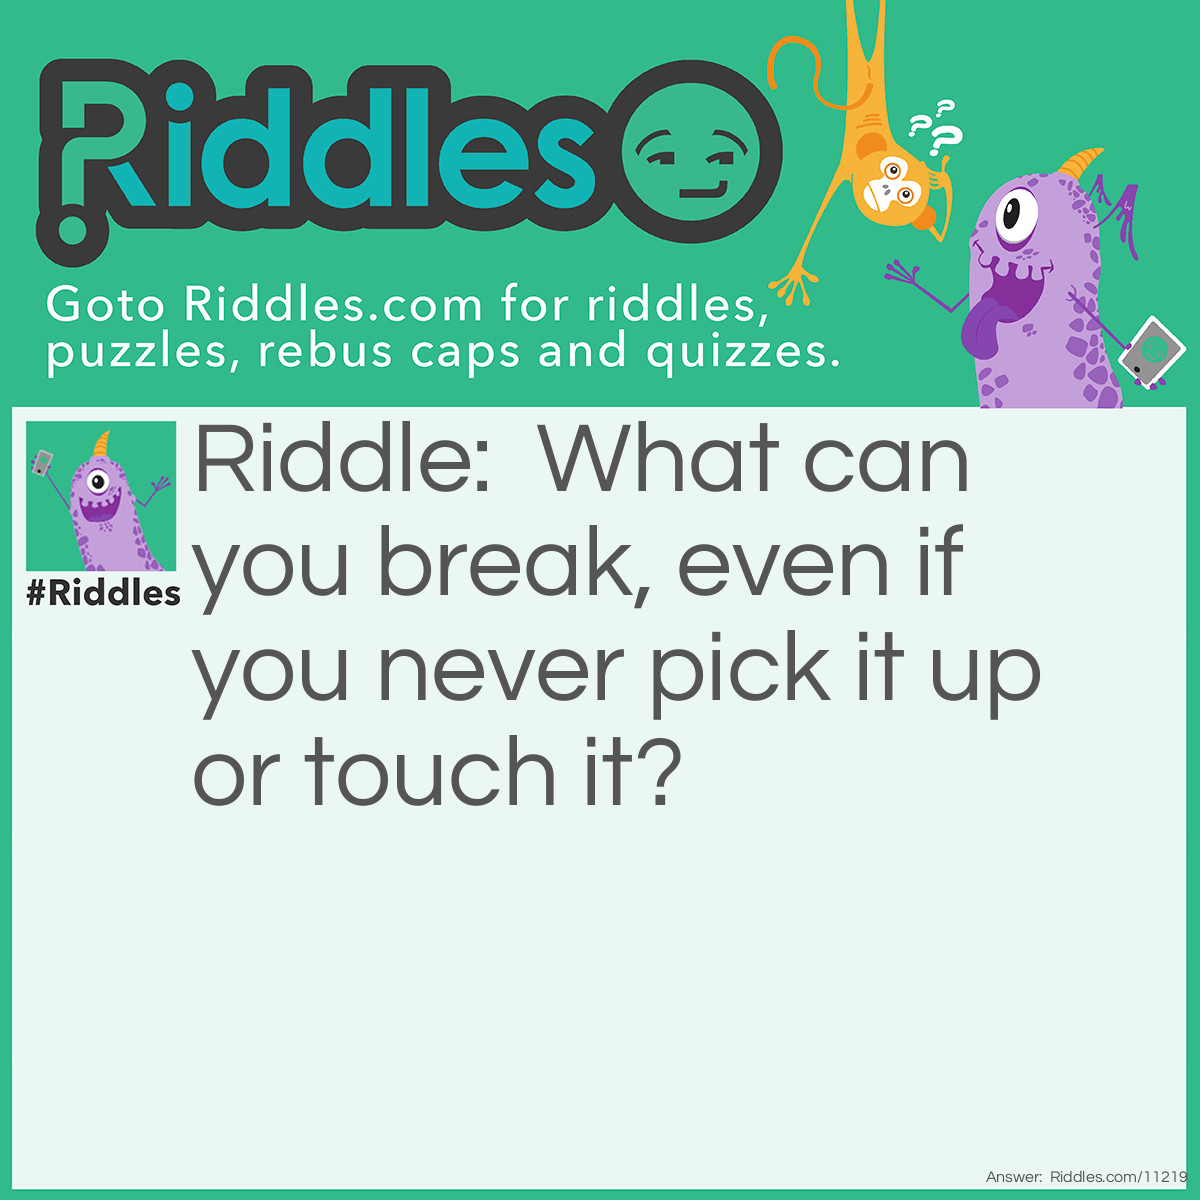 Riddle: What can you break, even if you never pick it up or touch it? Answer: A promise.